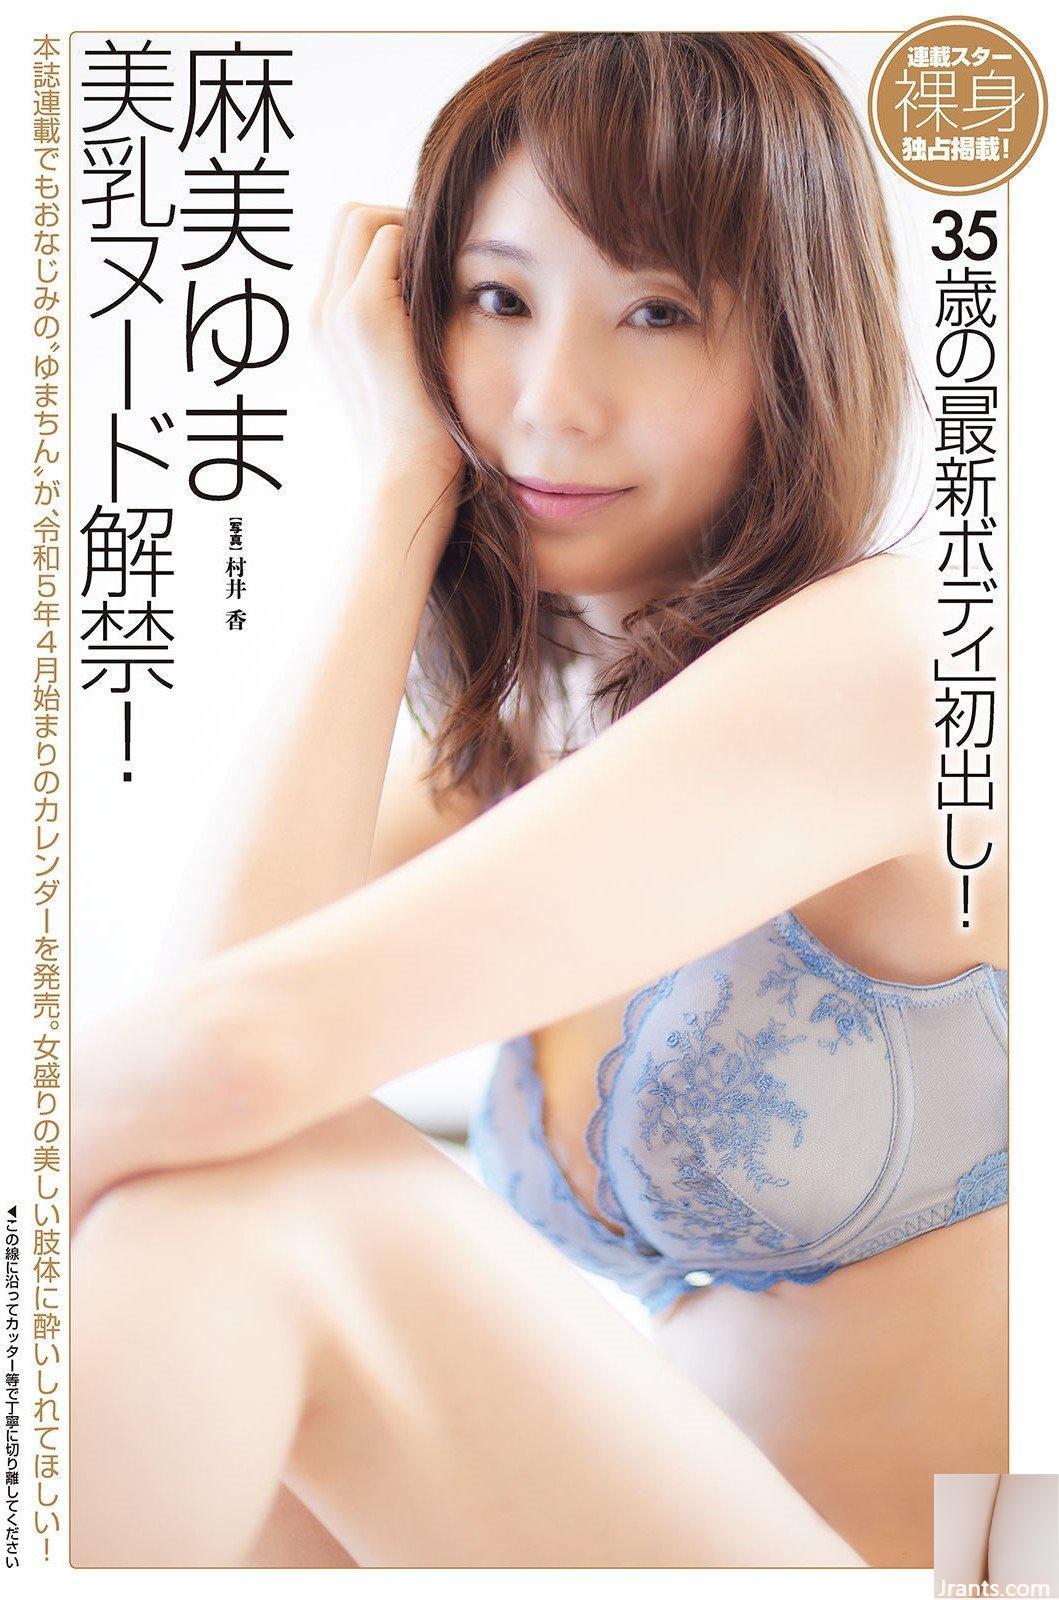 Asami Yumi) The charm of a young mature woman is not reduced, but she is even hotter in her clothes! (4P) image